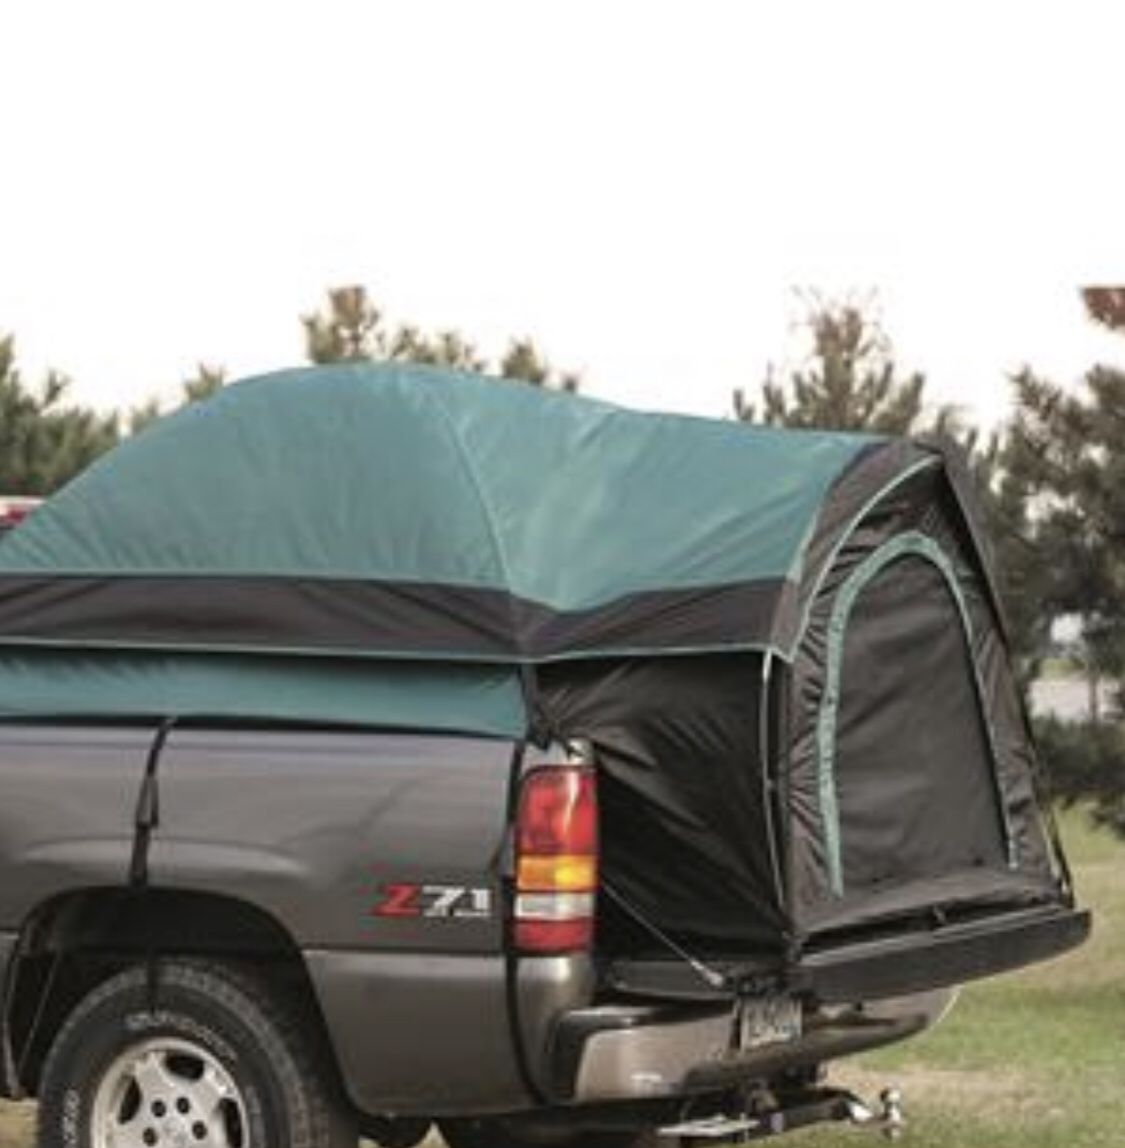 Truck Tent Compact 2-Person Camping Gear Outdoor Shade